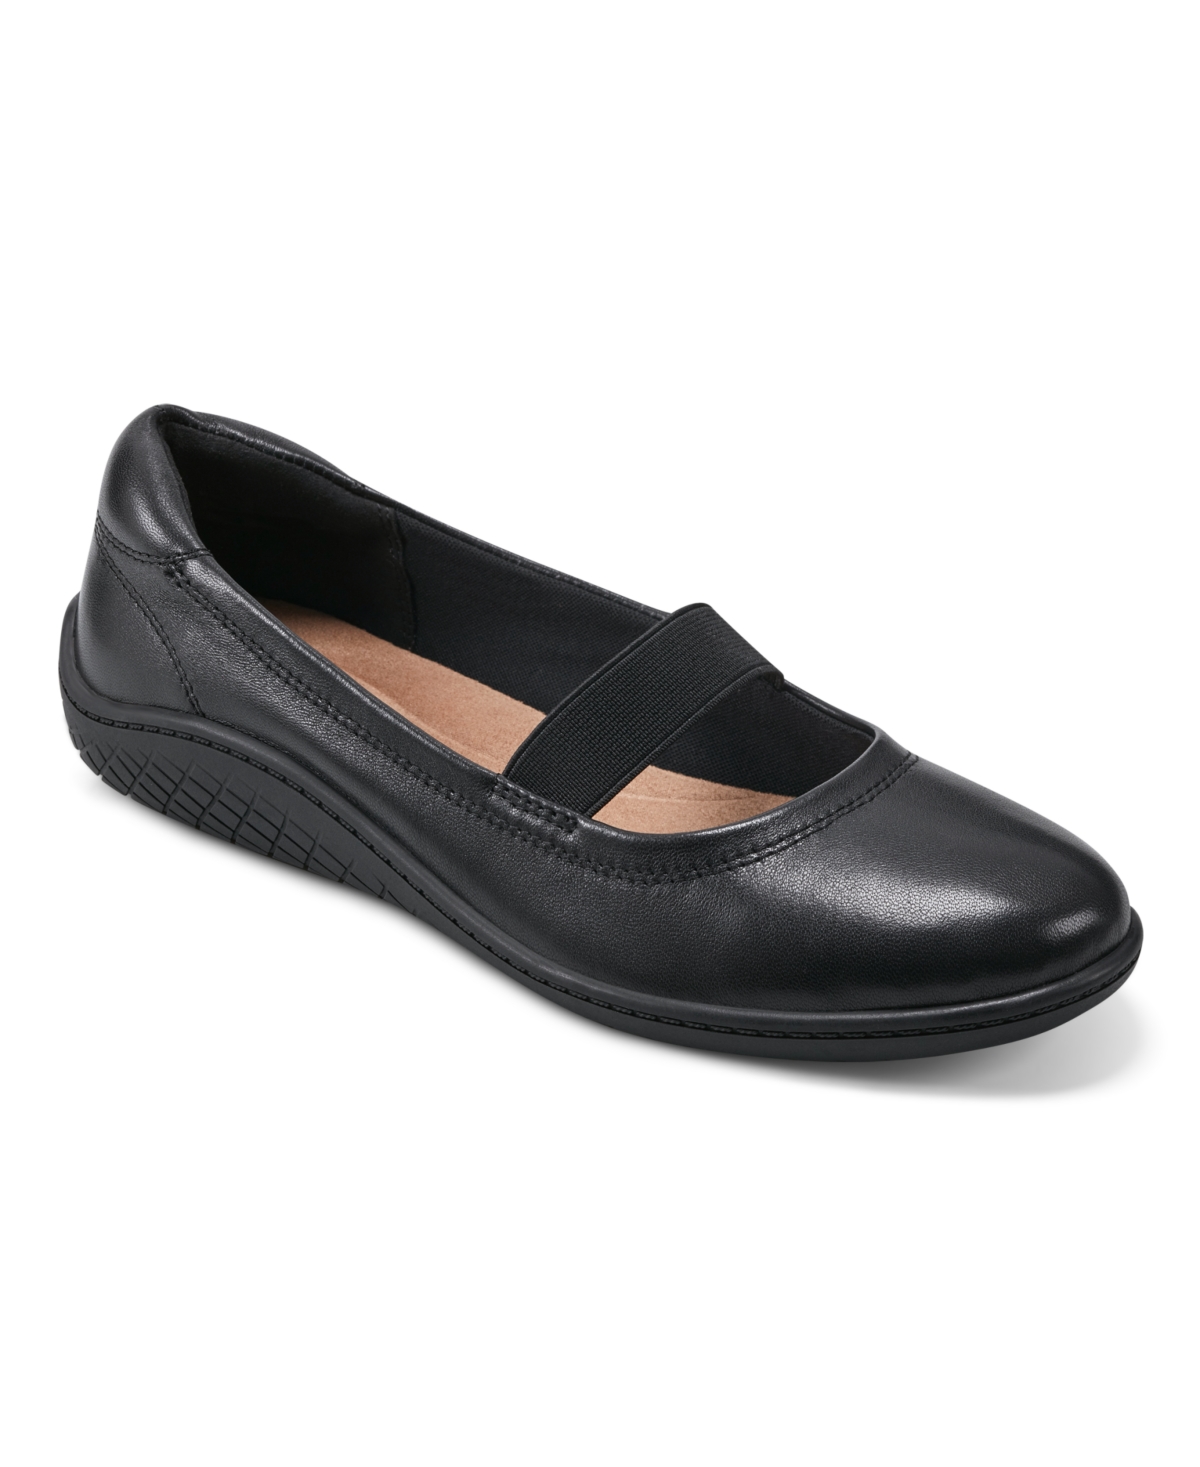 Women's Golden Round Toe Casual Ballet Flats - Black Leather